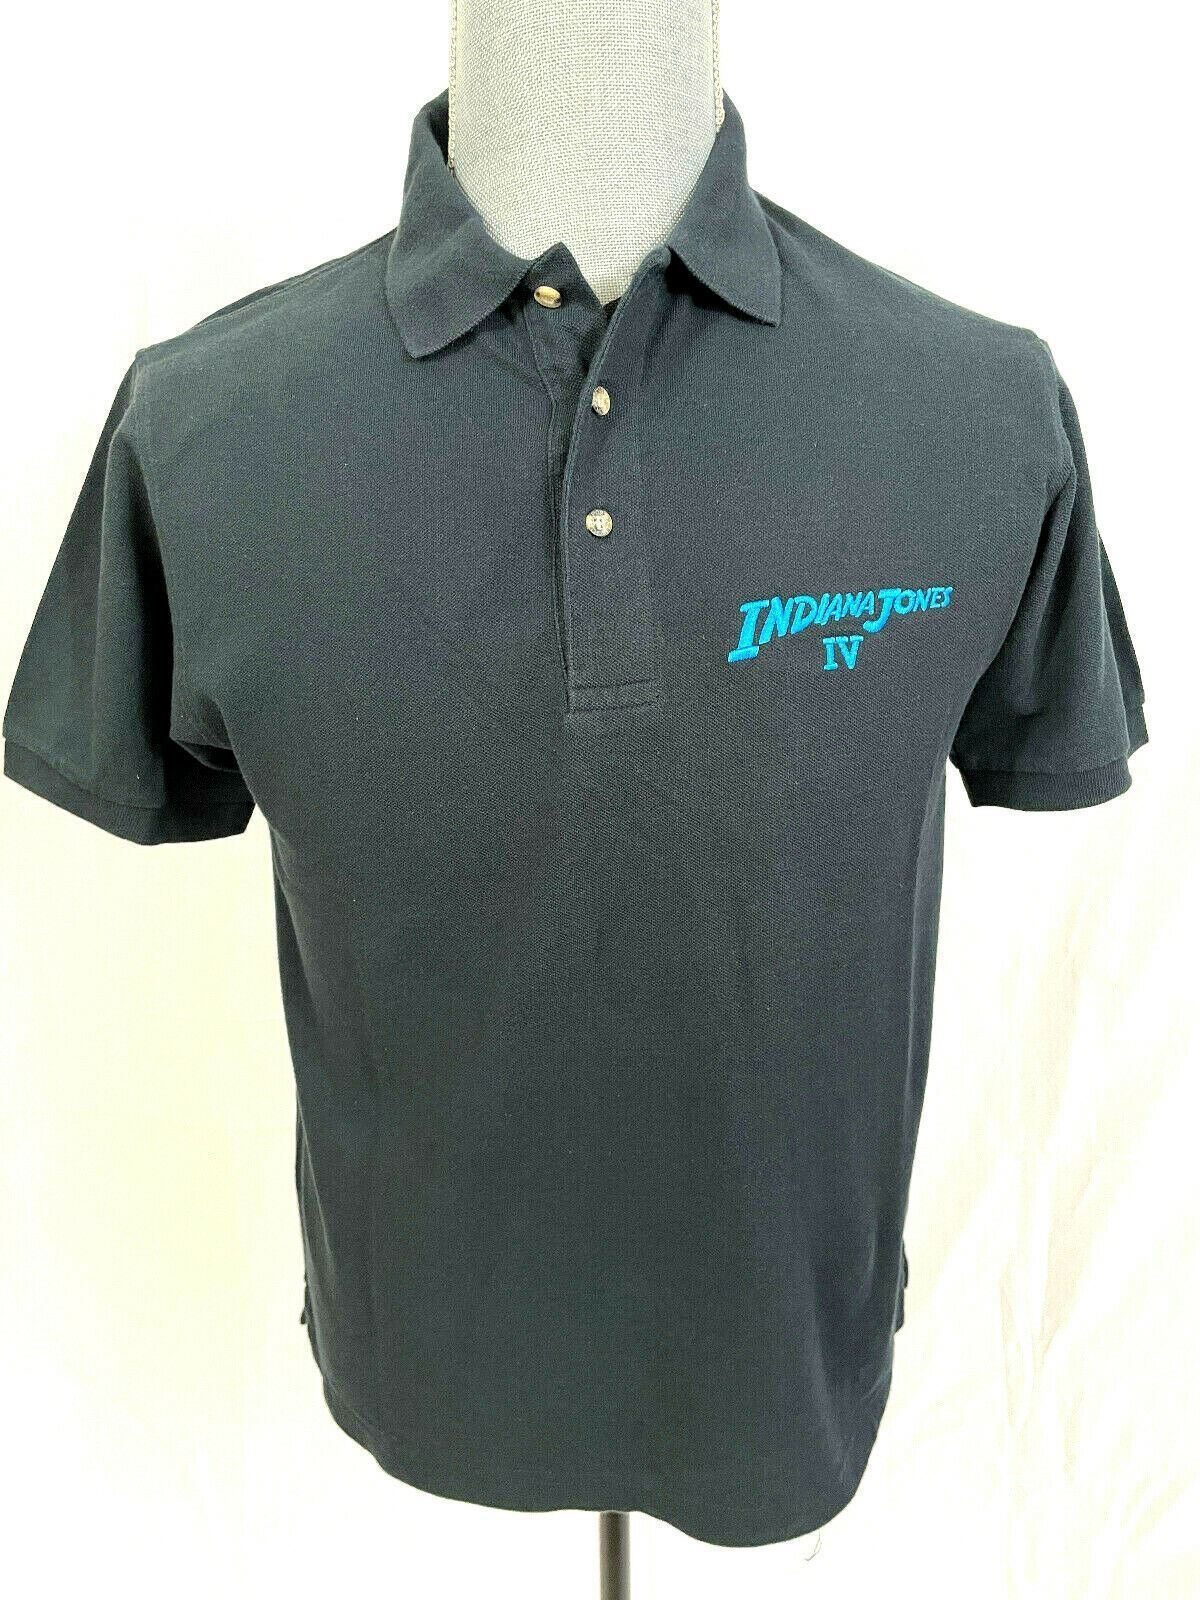 Indiana Jones IV (4) Possible Cast and Crew Only Polo Shirt - Size Small - RARE